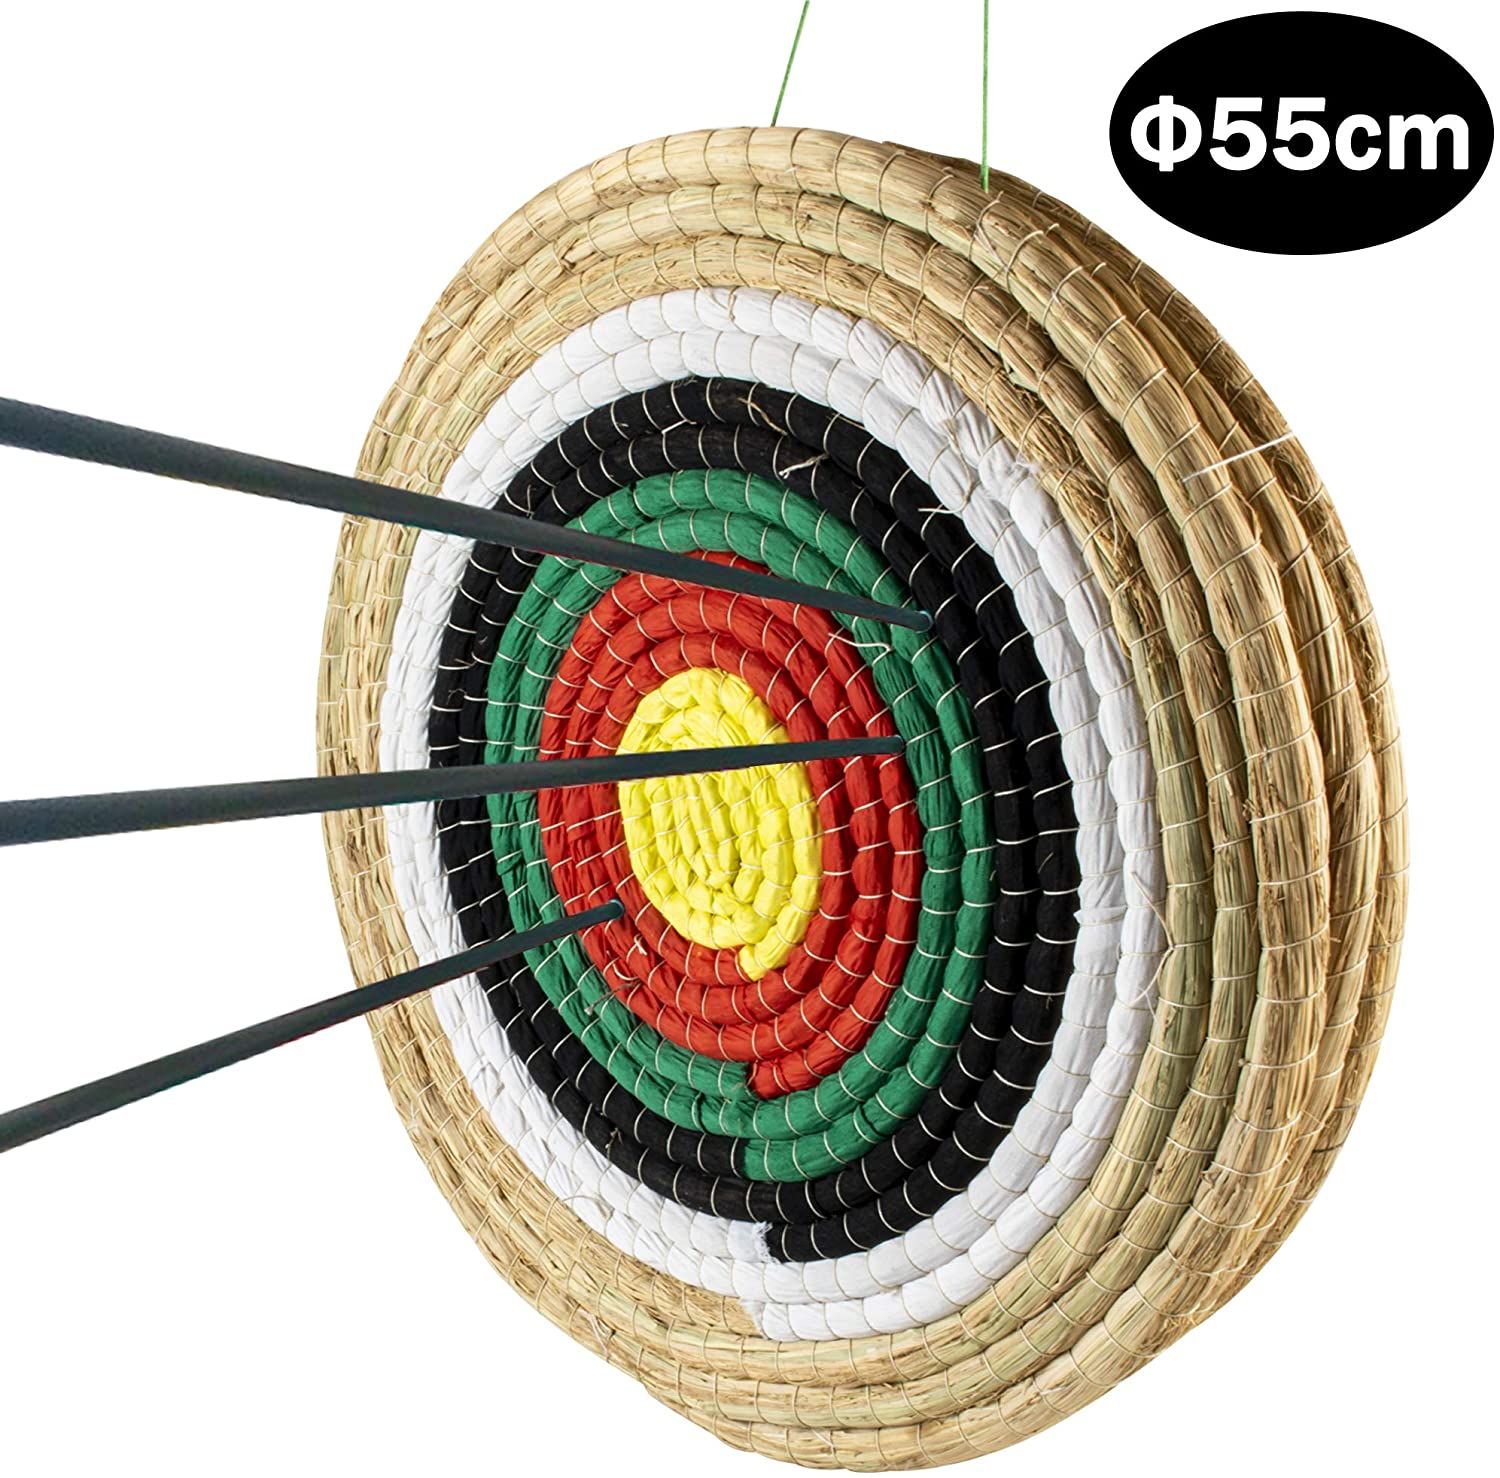 Beyond Traditional Archery: Experience Target Sports Like Never Before